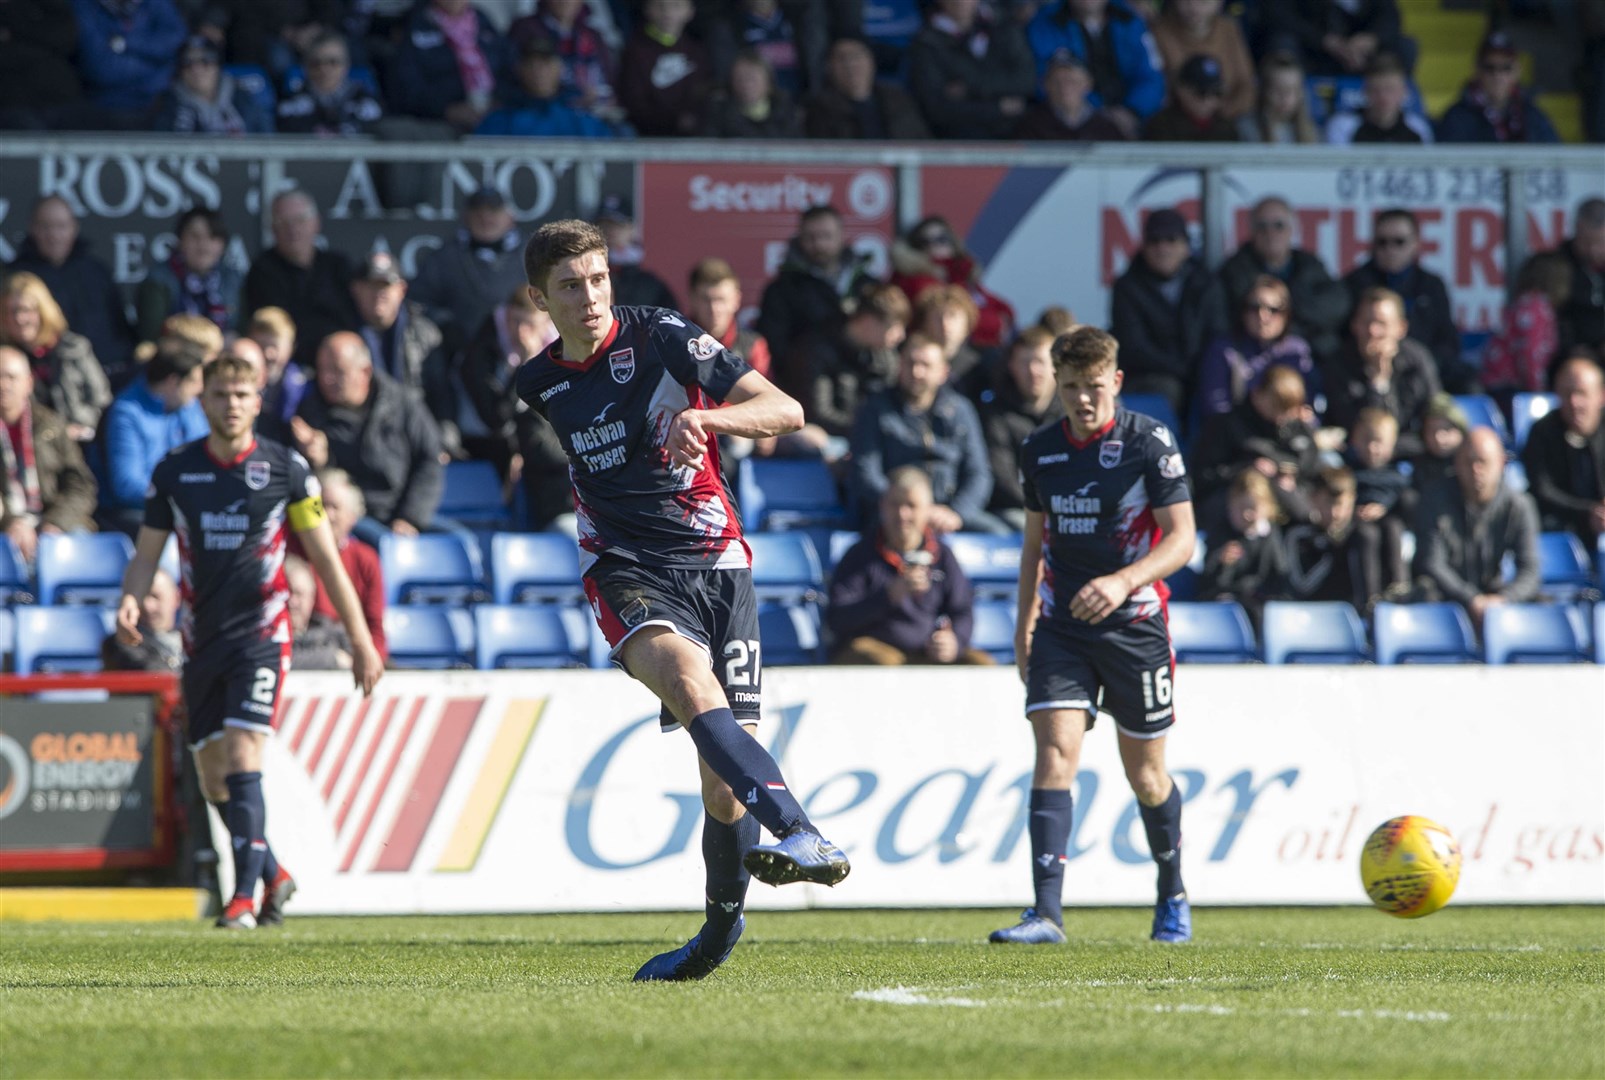 Picture - Ken Macpherson, Inverness. Ross County(0) v Partick Thistle(0). 13.04.19. Ross County's Ross Stewart fires in a shot.